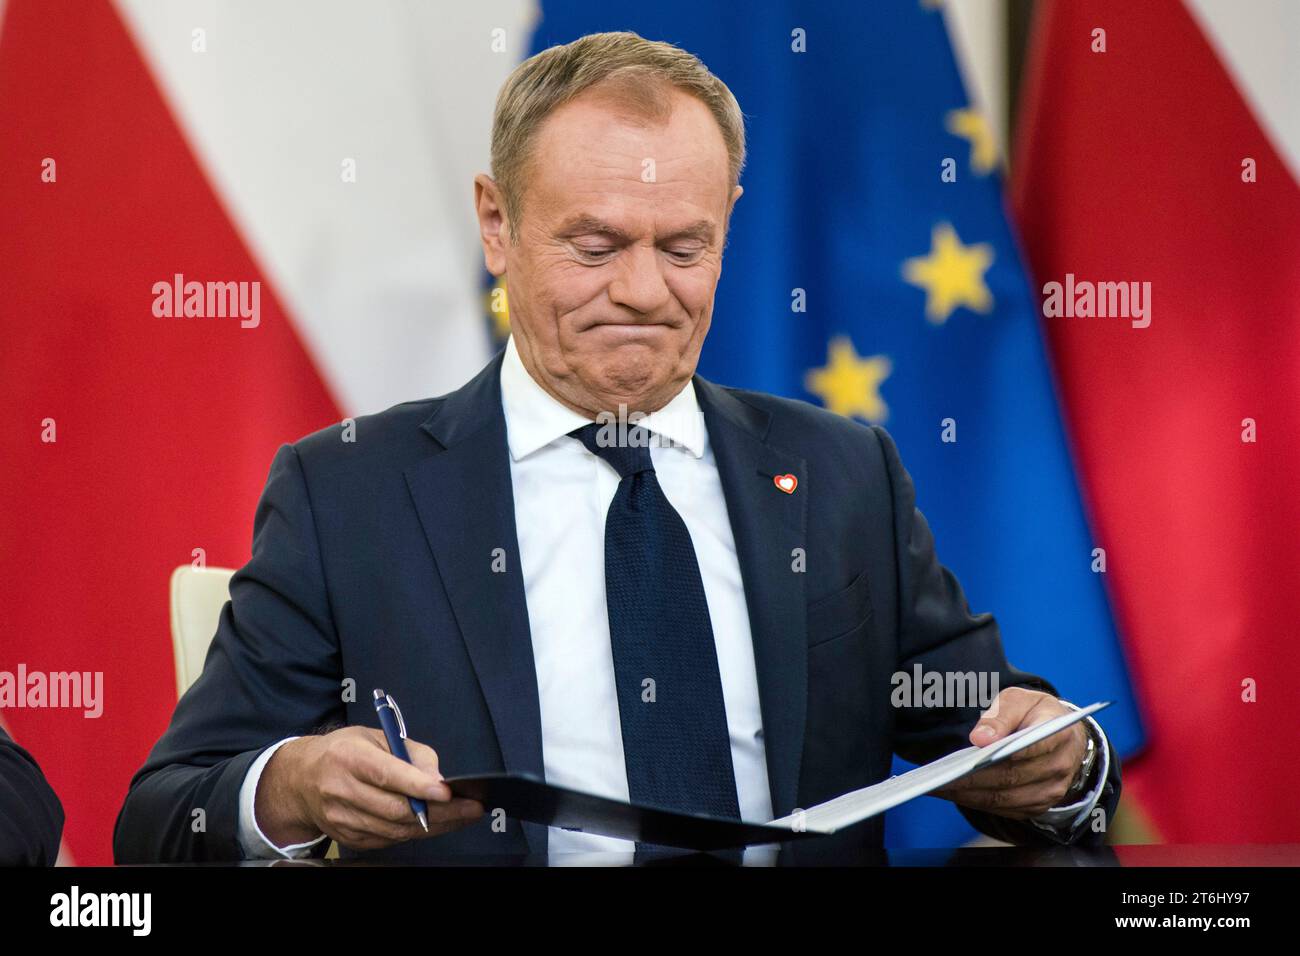 Donald Tusk, leader of the Civic Coalition, signs the coalition agreement in the Parliament. The leaders of Polish opposition parties have signed a coalition agreement that lays out a road map for governing the nation over the next four years. The parties collectively won a majority of votes in last month's parliamentary election. Their candidate to be the next prime minister is Donald Tusk, a former prime minister who leads the largest of the opposition parties, the centrist Civic Platform. Tusk said the parties worked to seal their agreement a day before the Independence Day holiday, adding Stock Photo